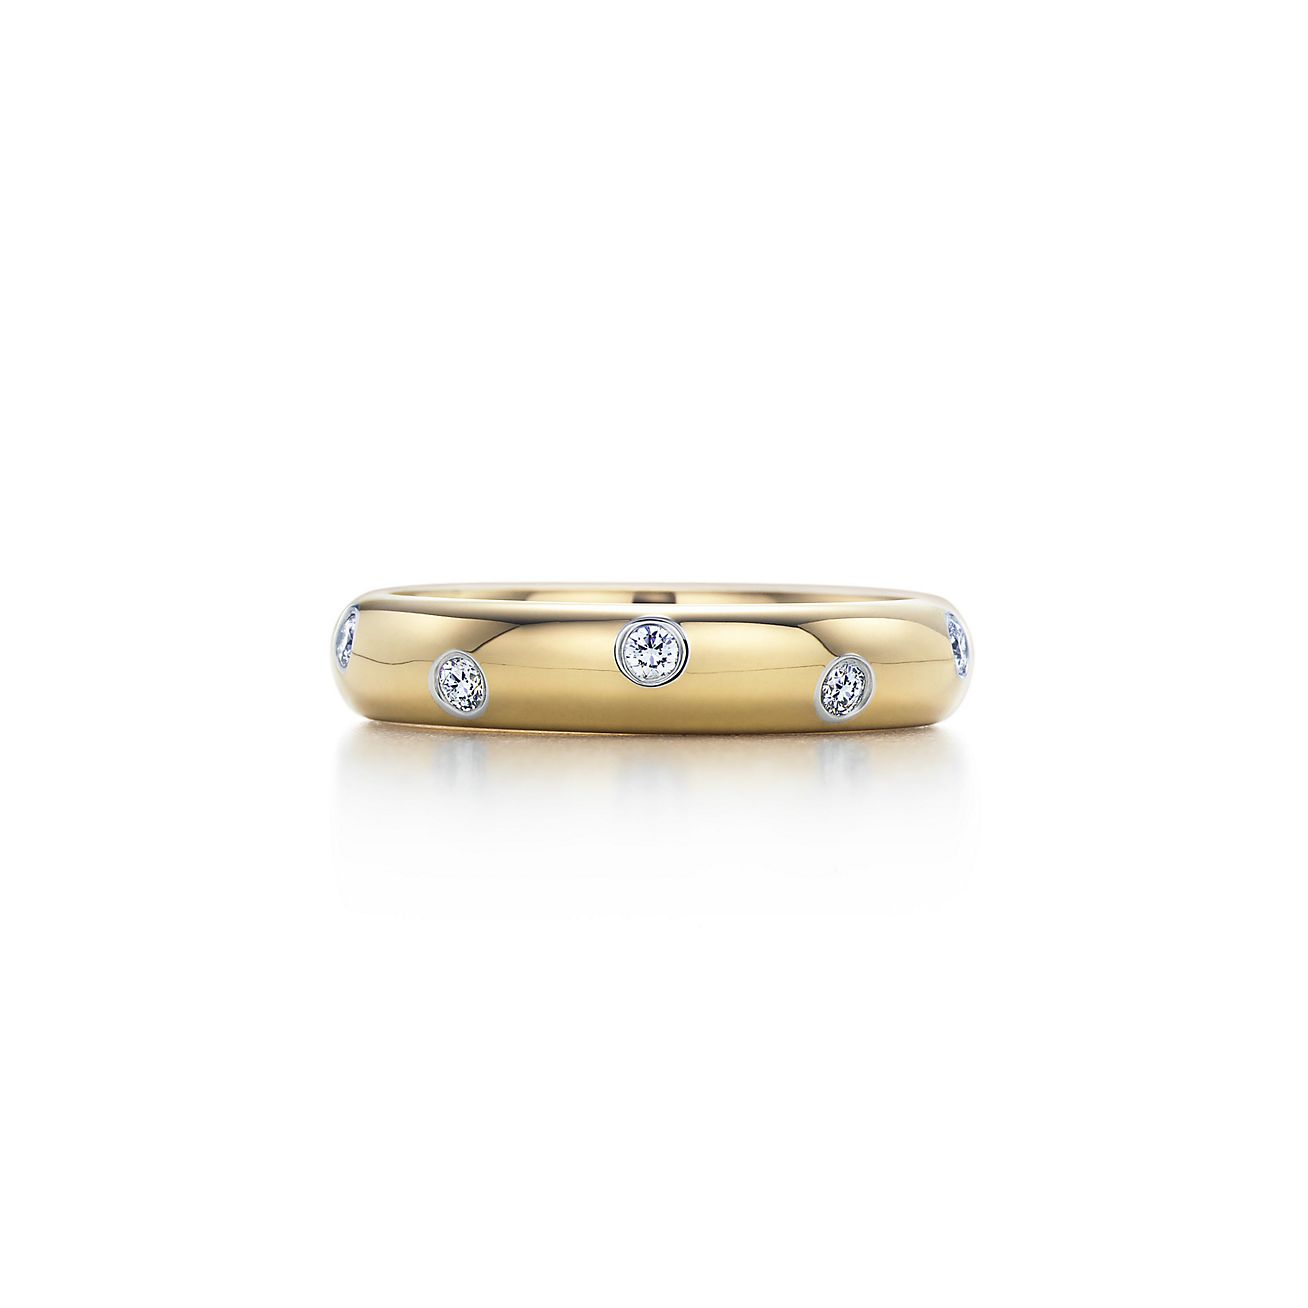 Etoile band ring in 18k gold with 